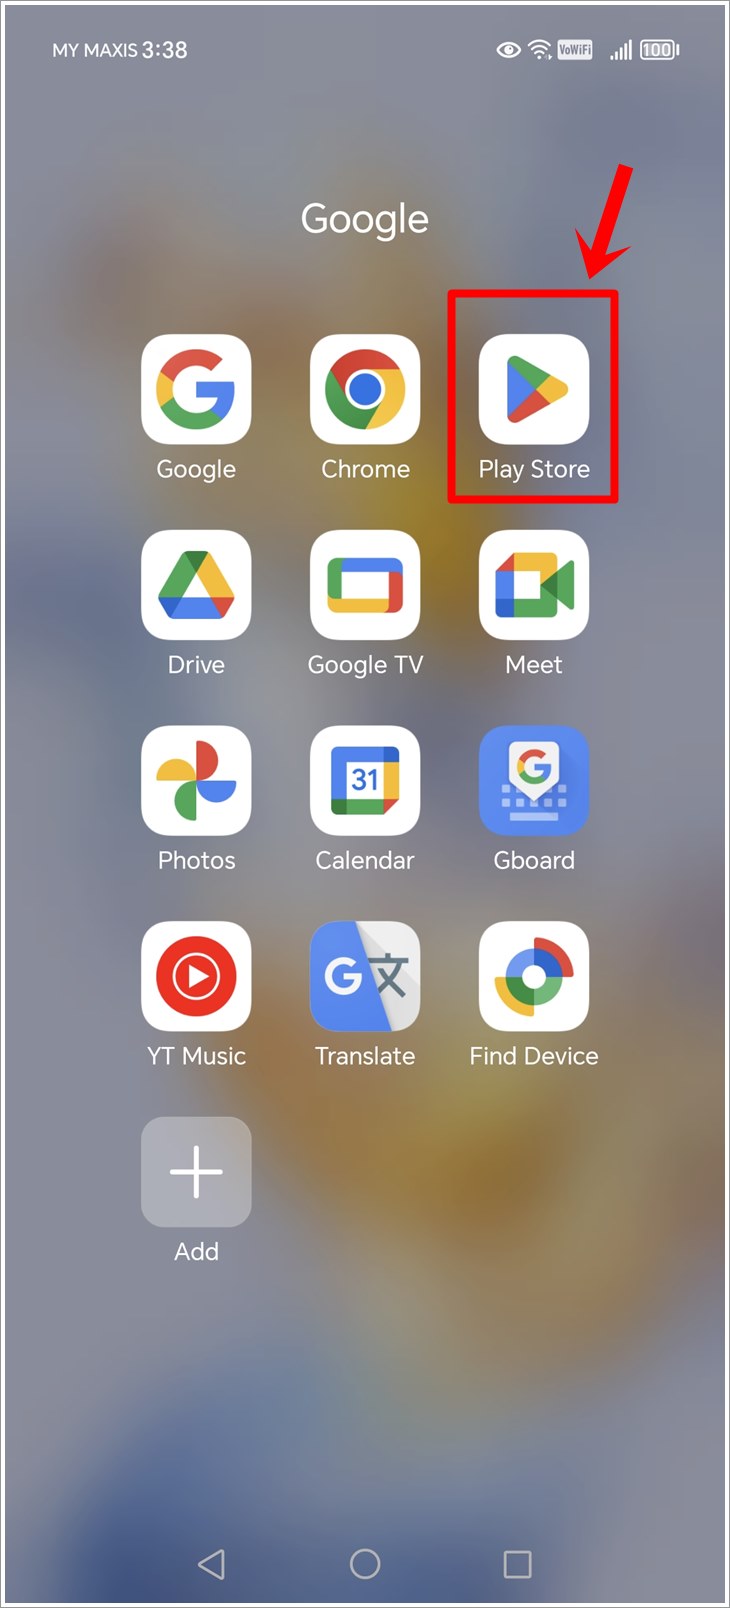 This is a screenshot of an Android phone with the Google Play Store icon highlighted.